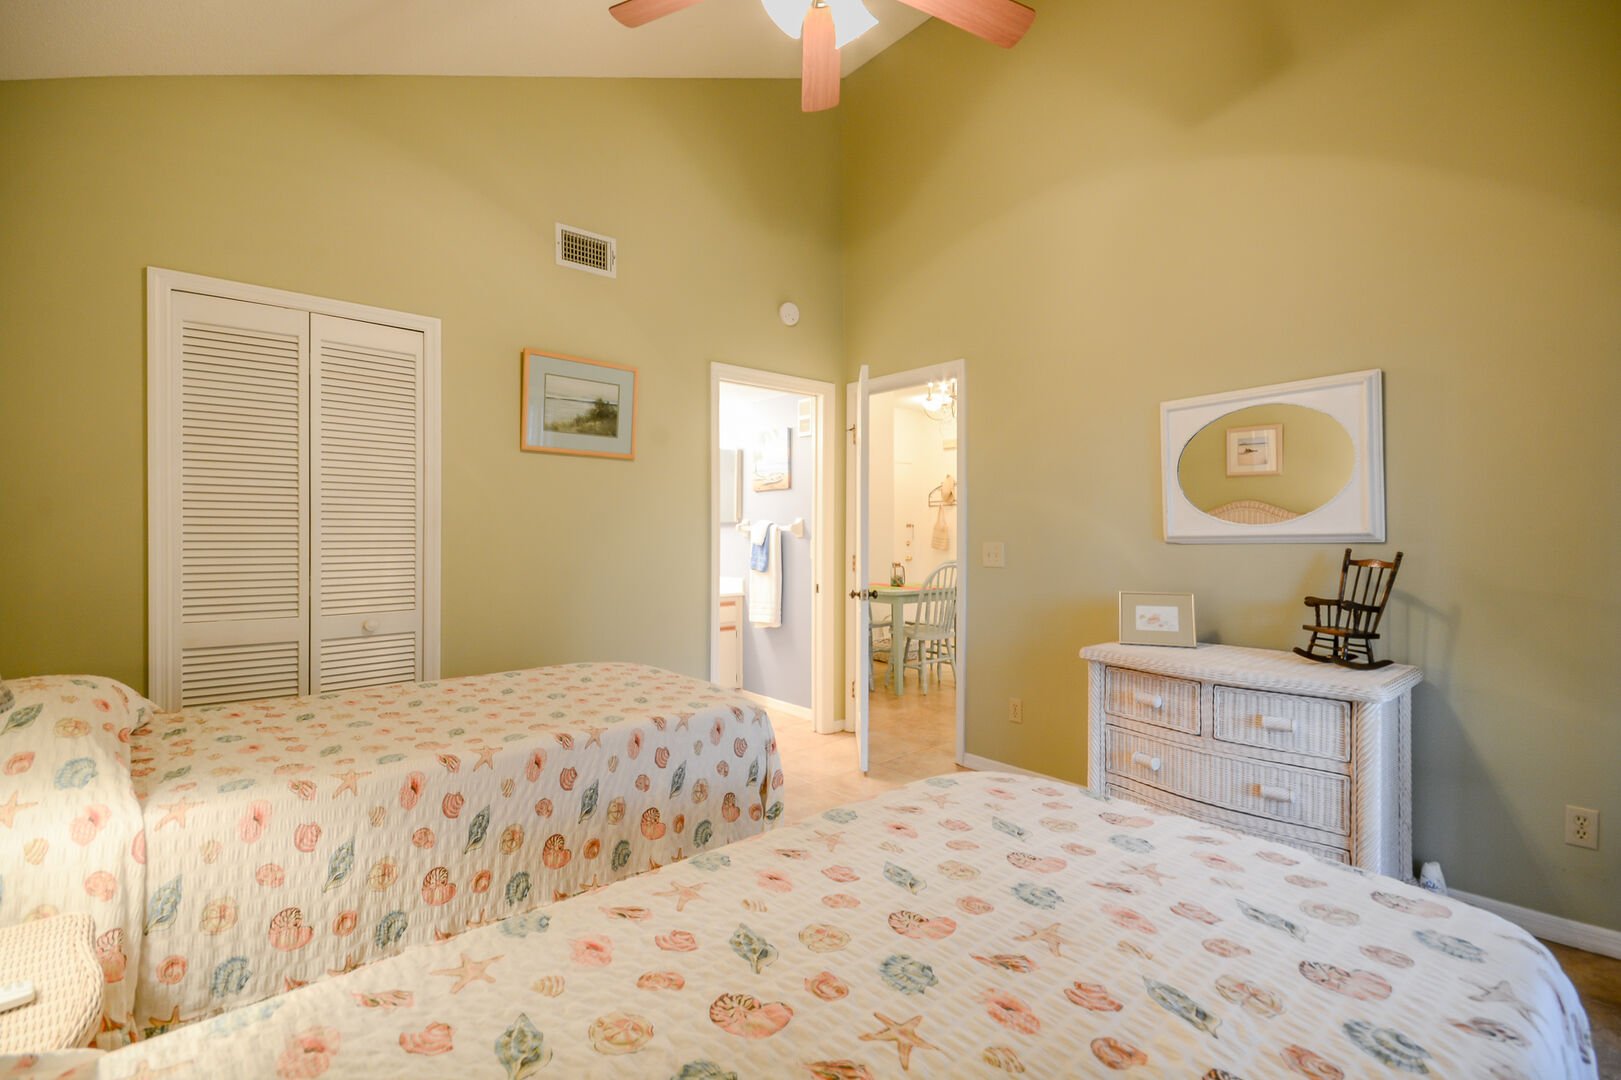 The guest bedroom of this vacation rental in New Smyrna Beach FL, with two beds.